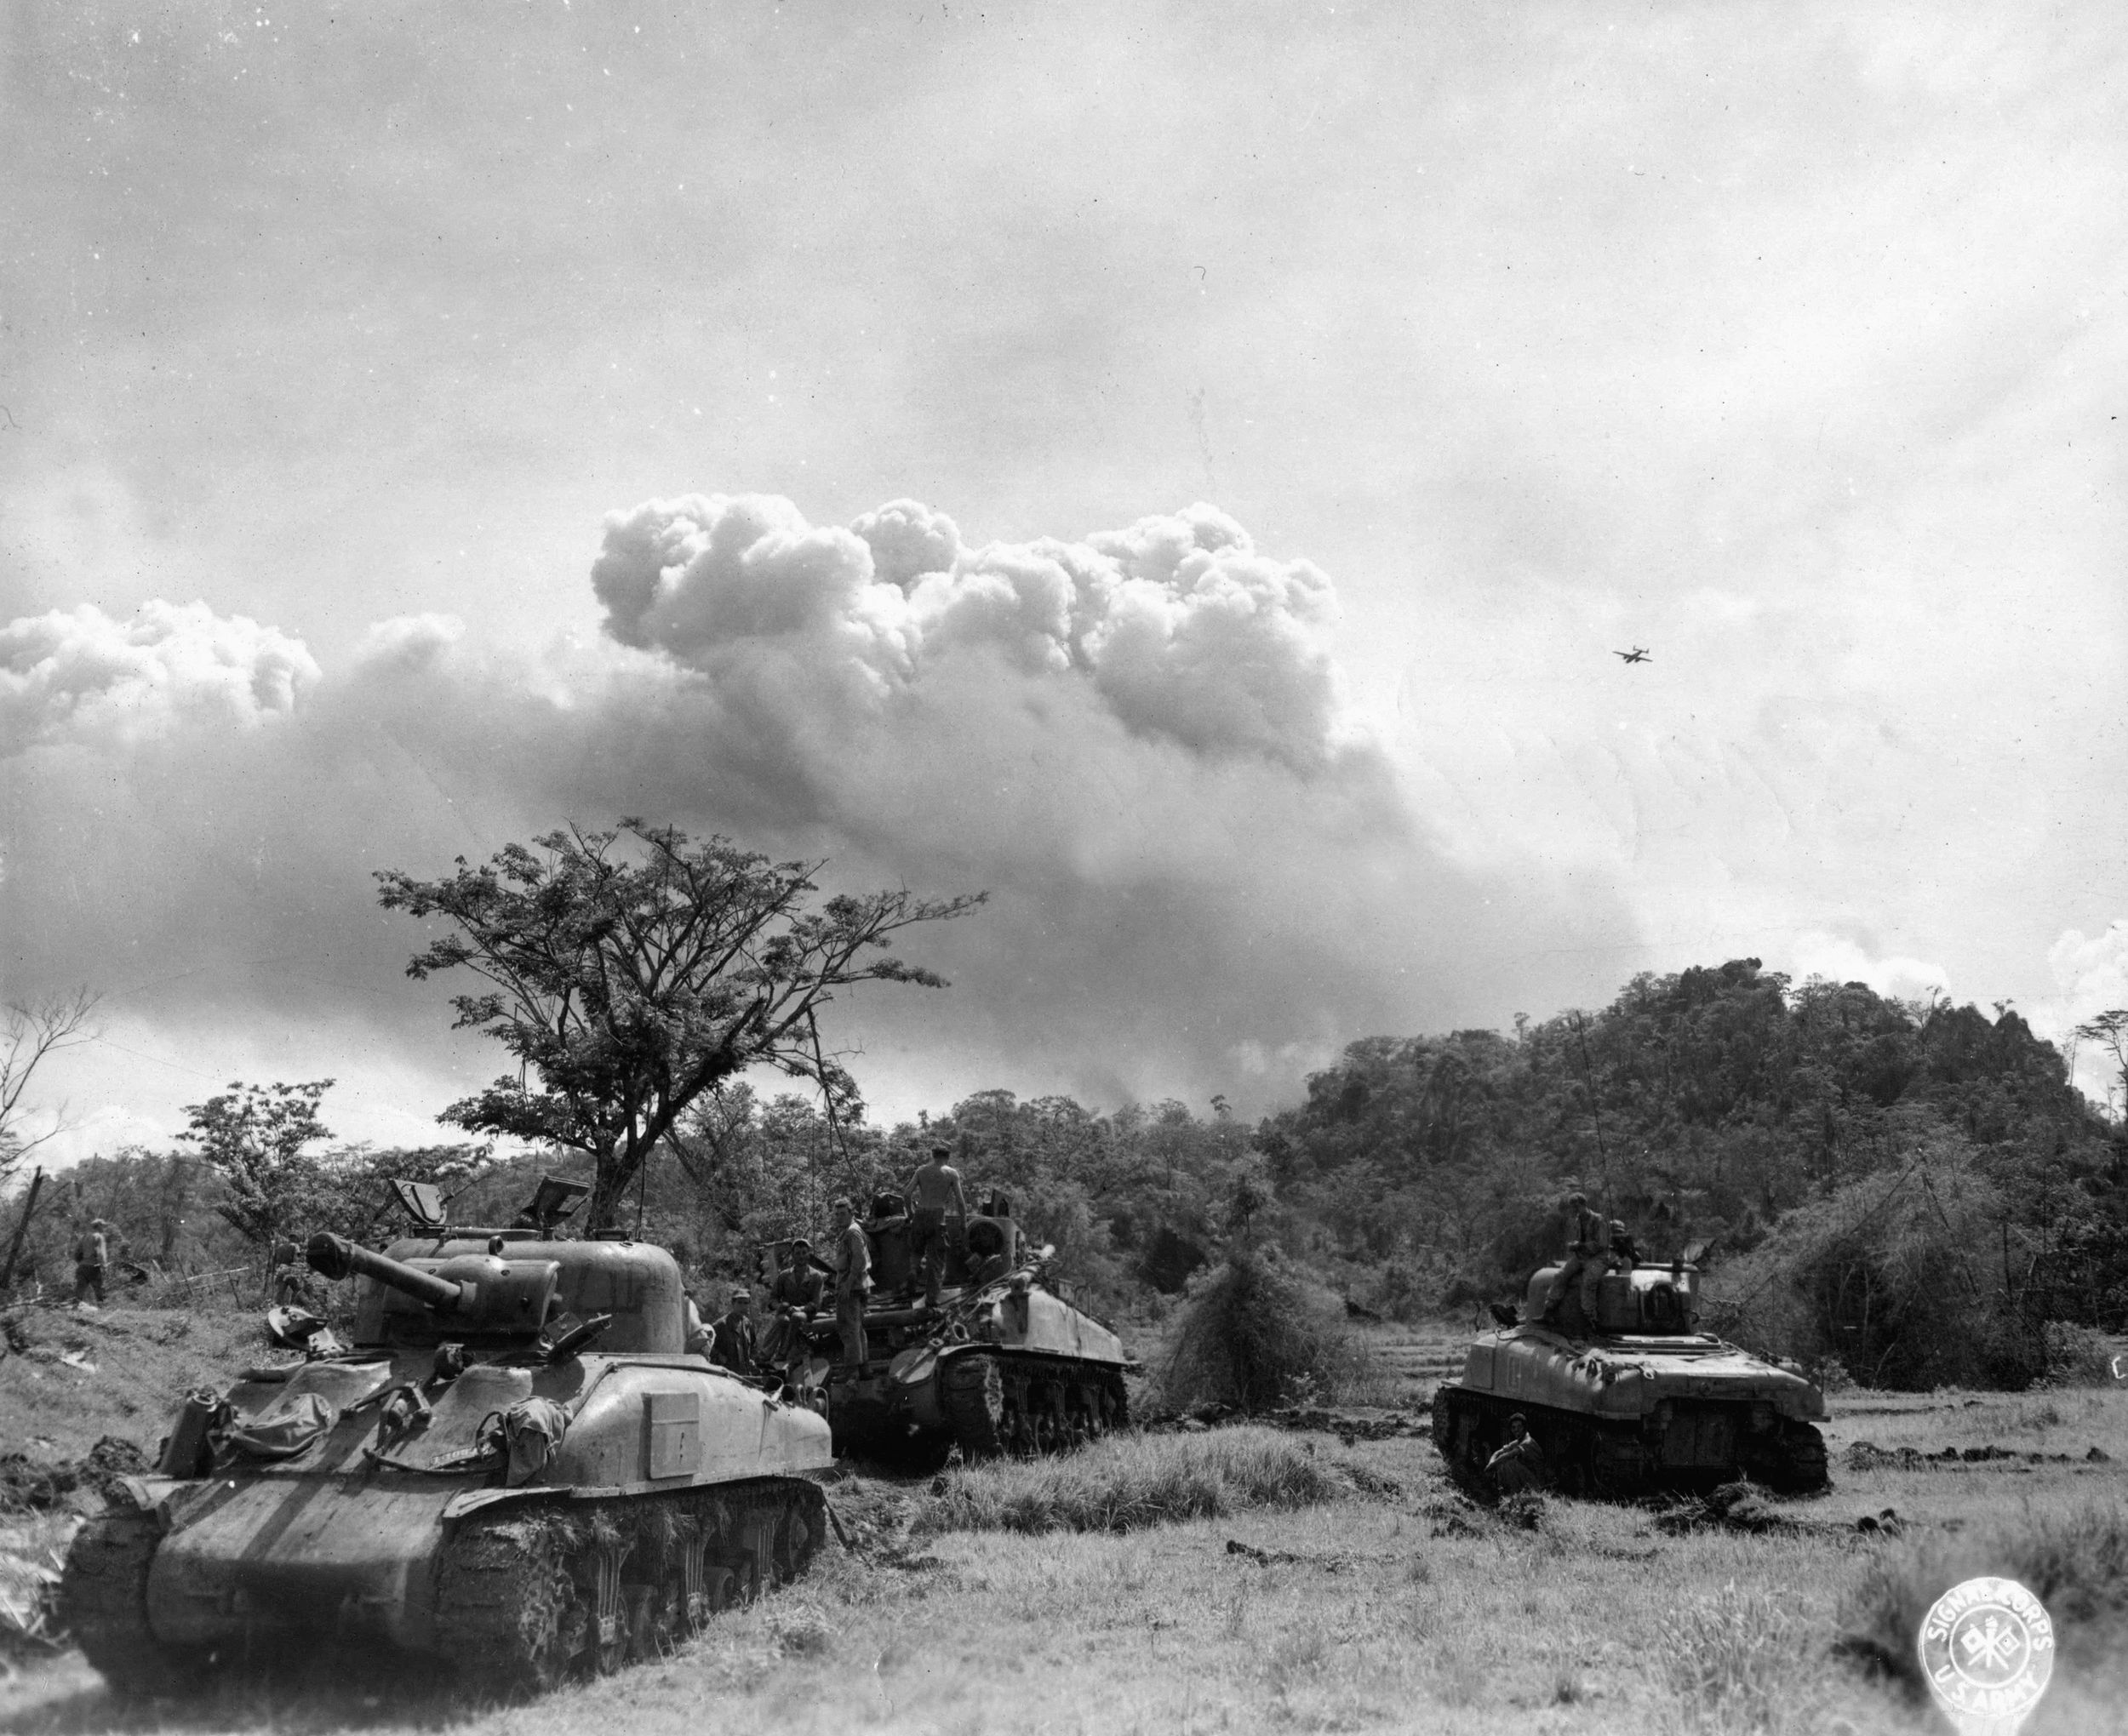 On the heels of an air strike, Sherman tanks of the 754th Battalion prepare to attack Japanese positions in the area of the Ipo Dam on Luzon.